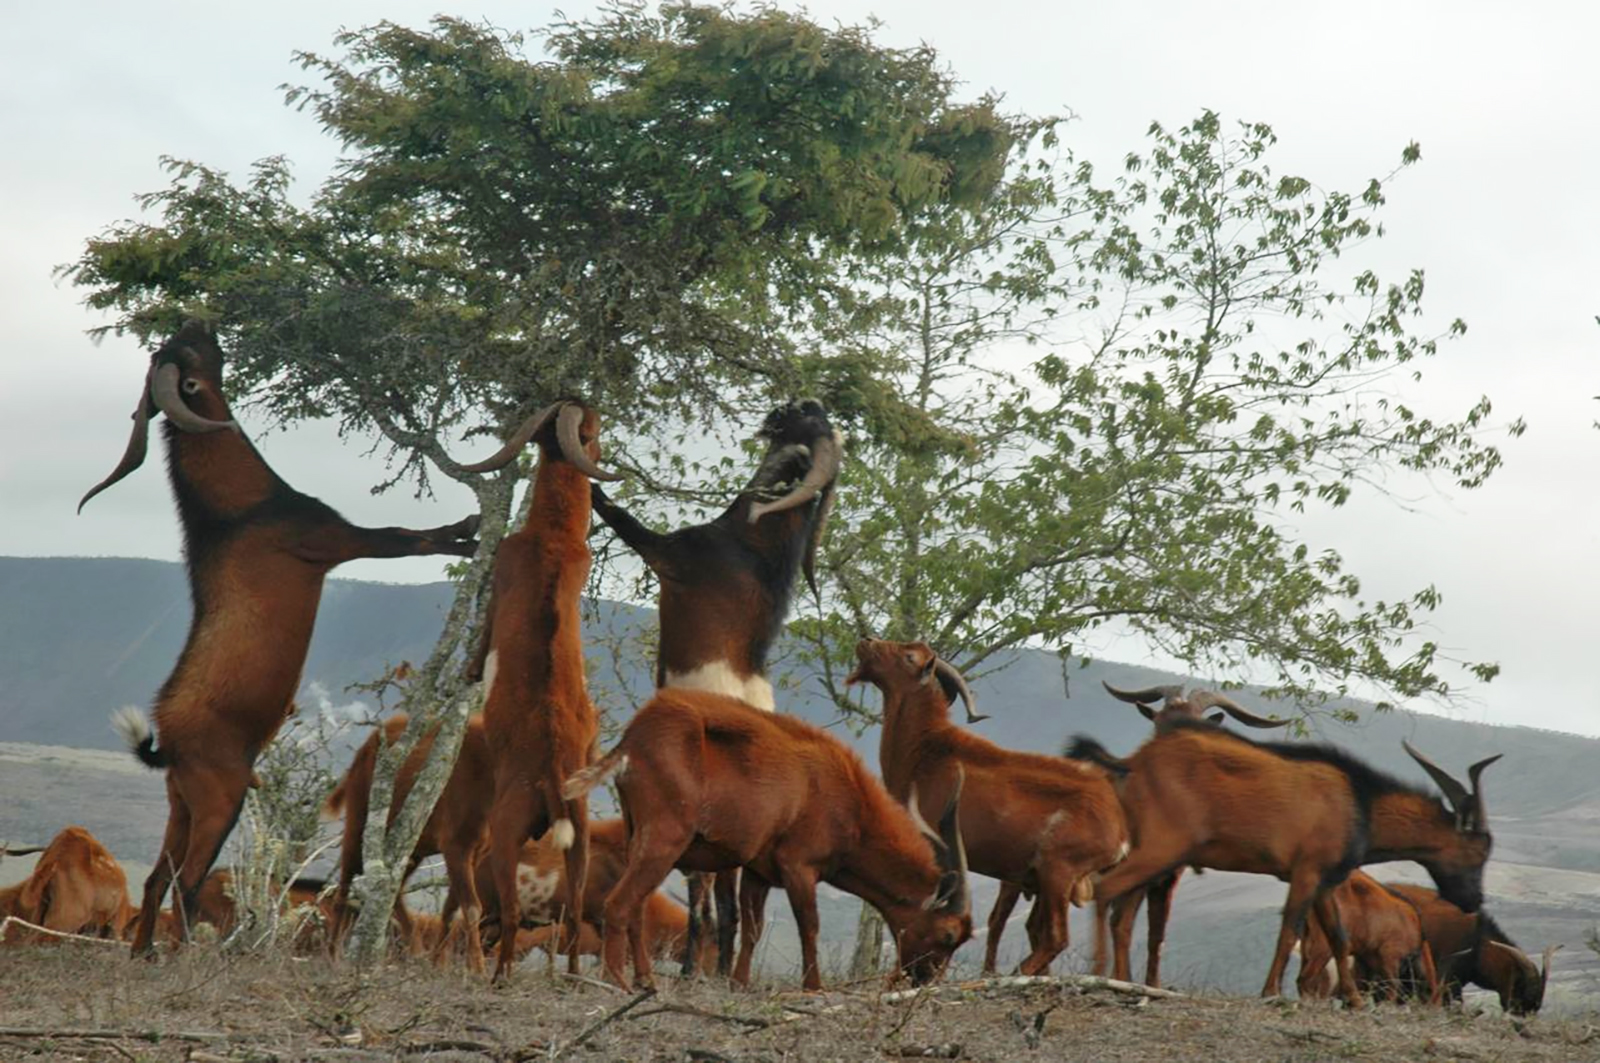 goats eat vegetation in the Galapagos